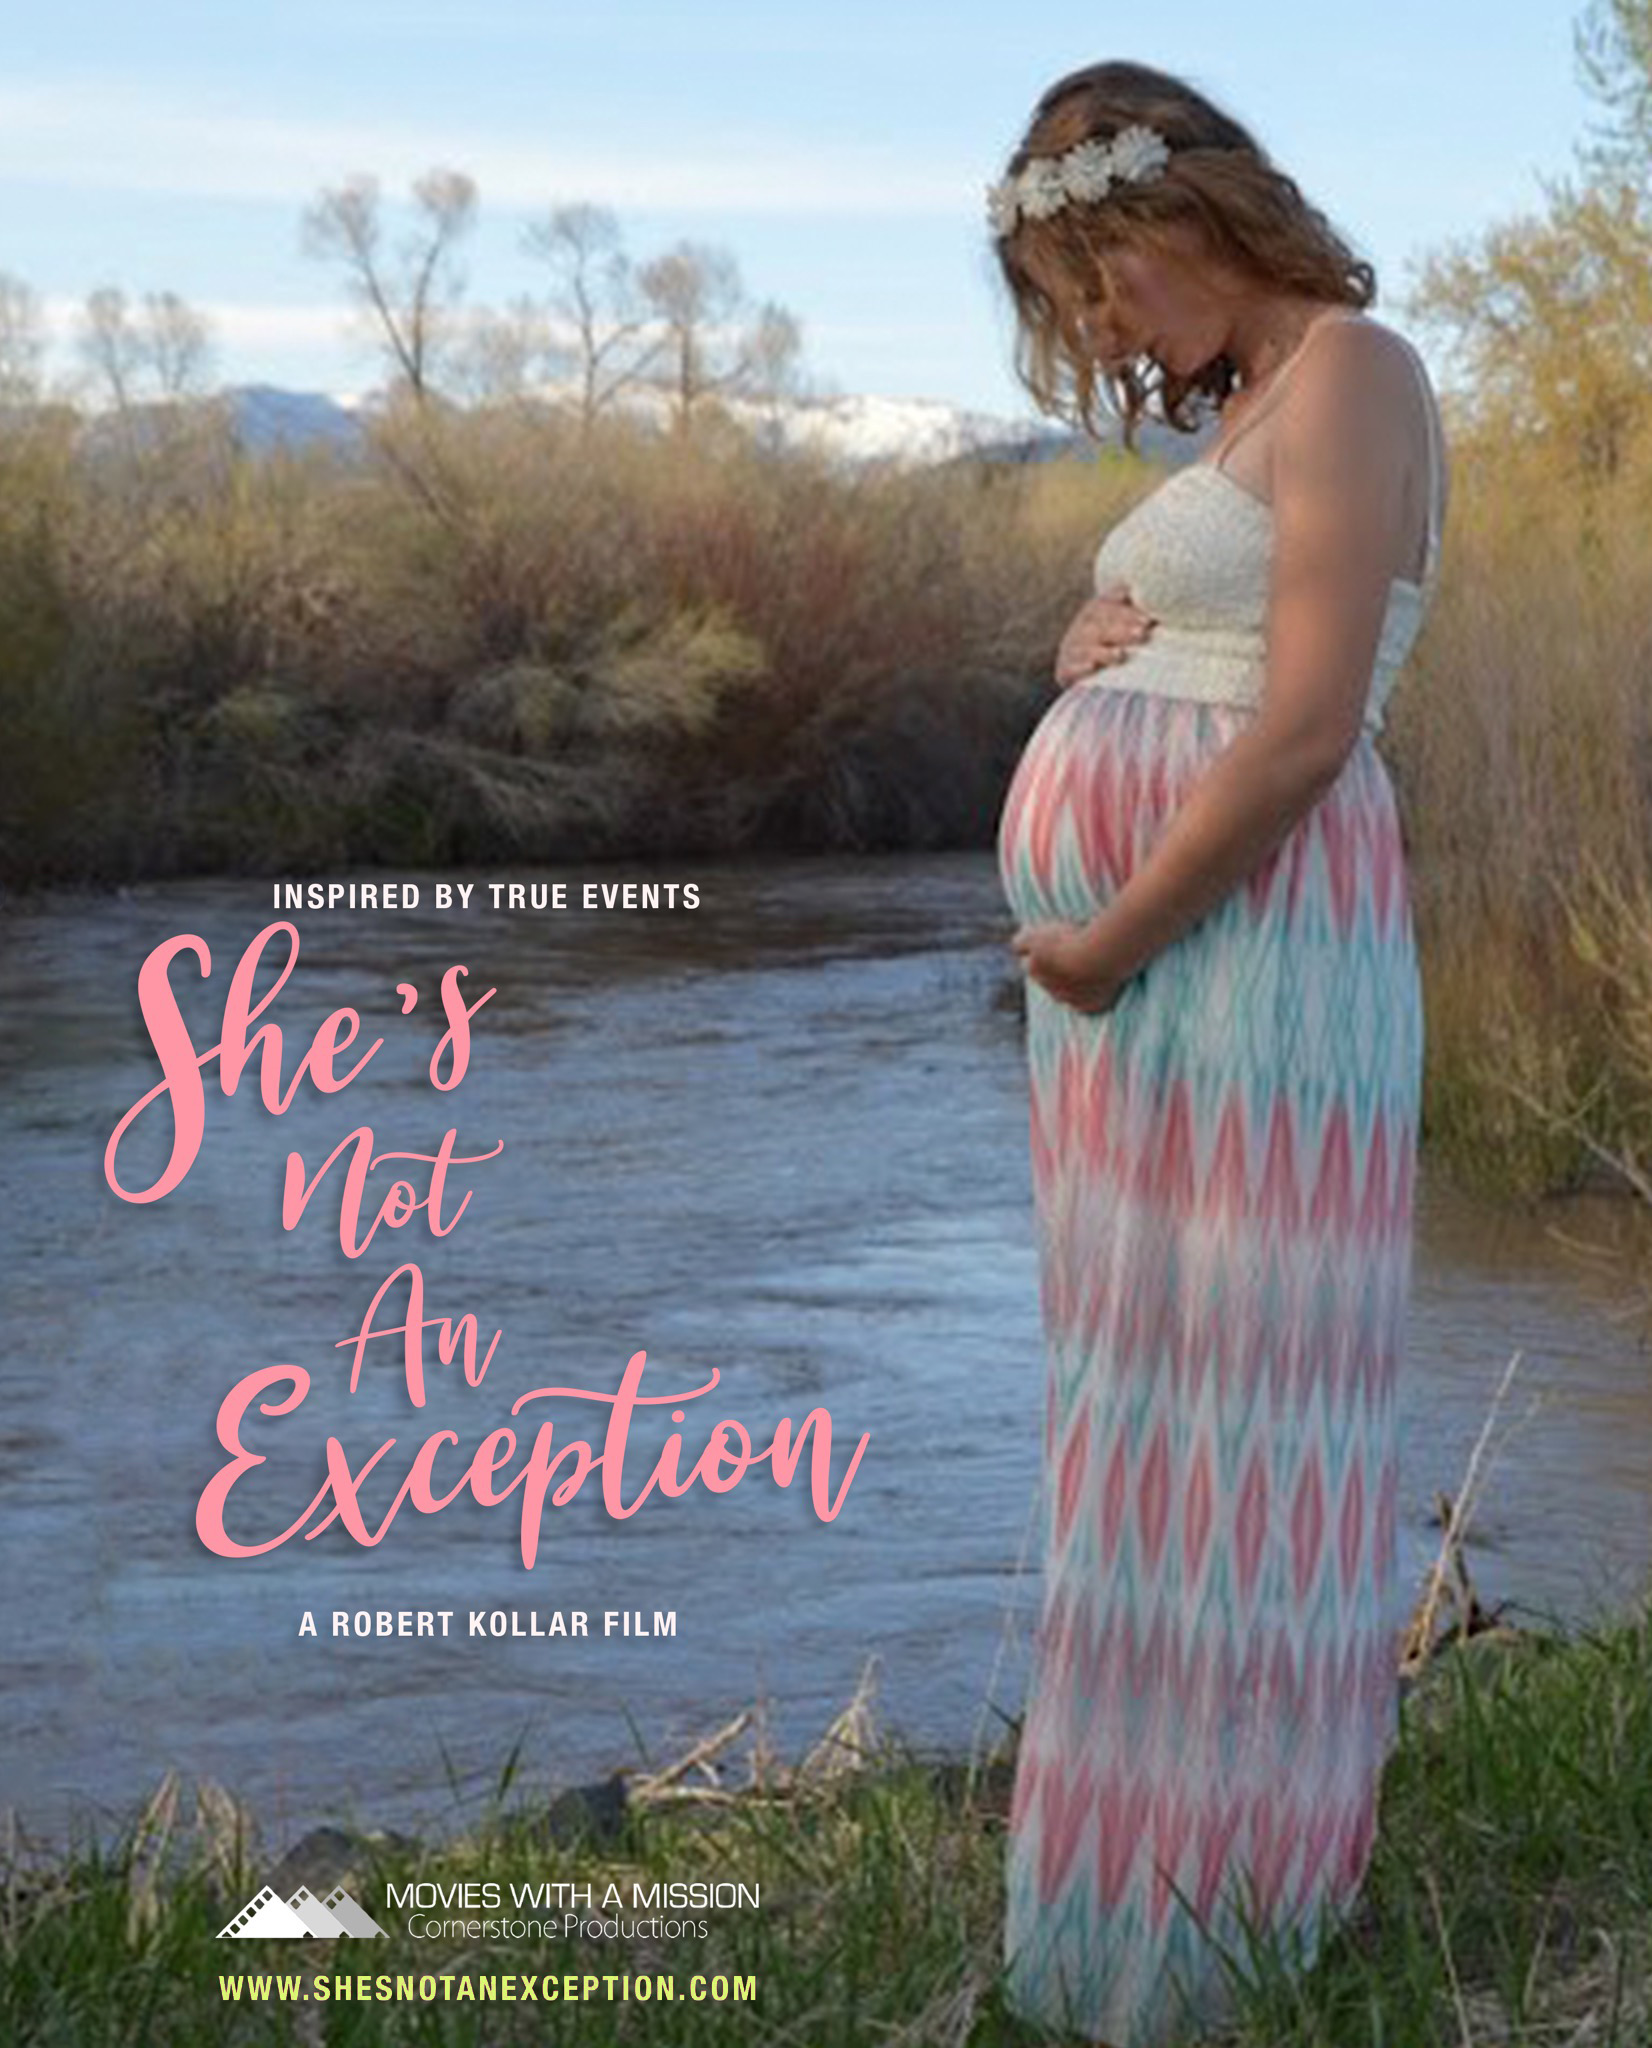 SHE'S NOT AN EXCEPTION raw movie poster